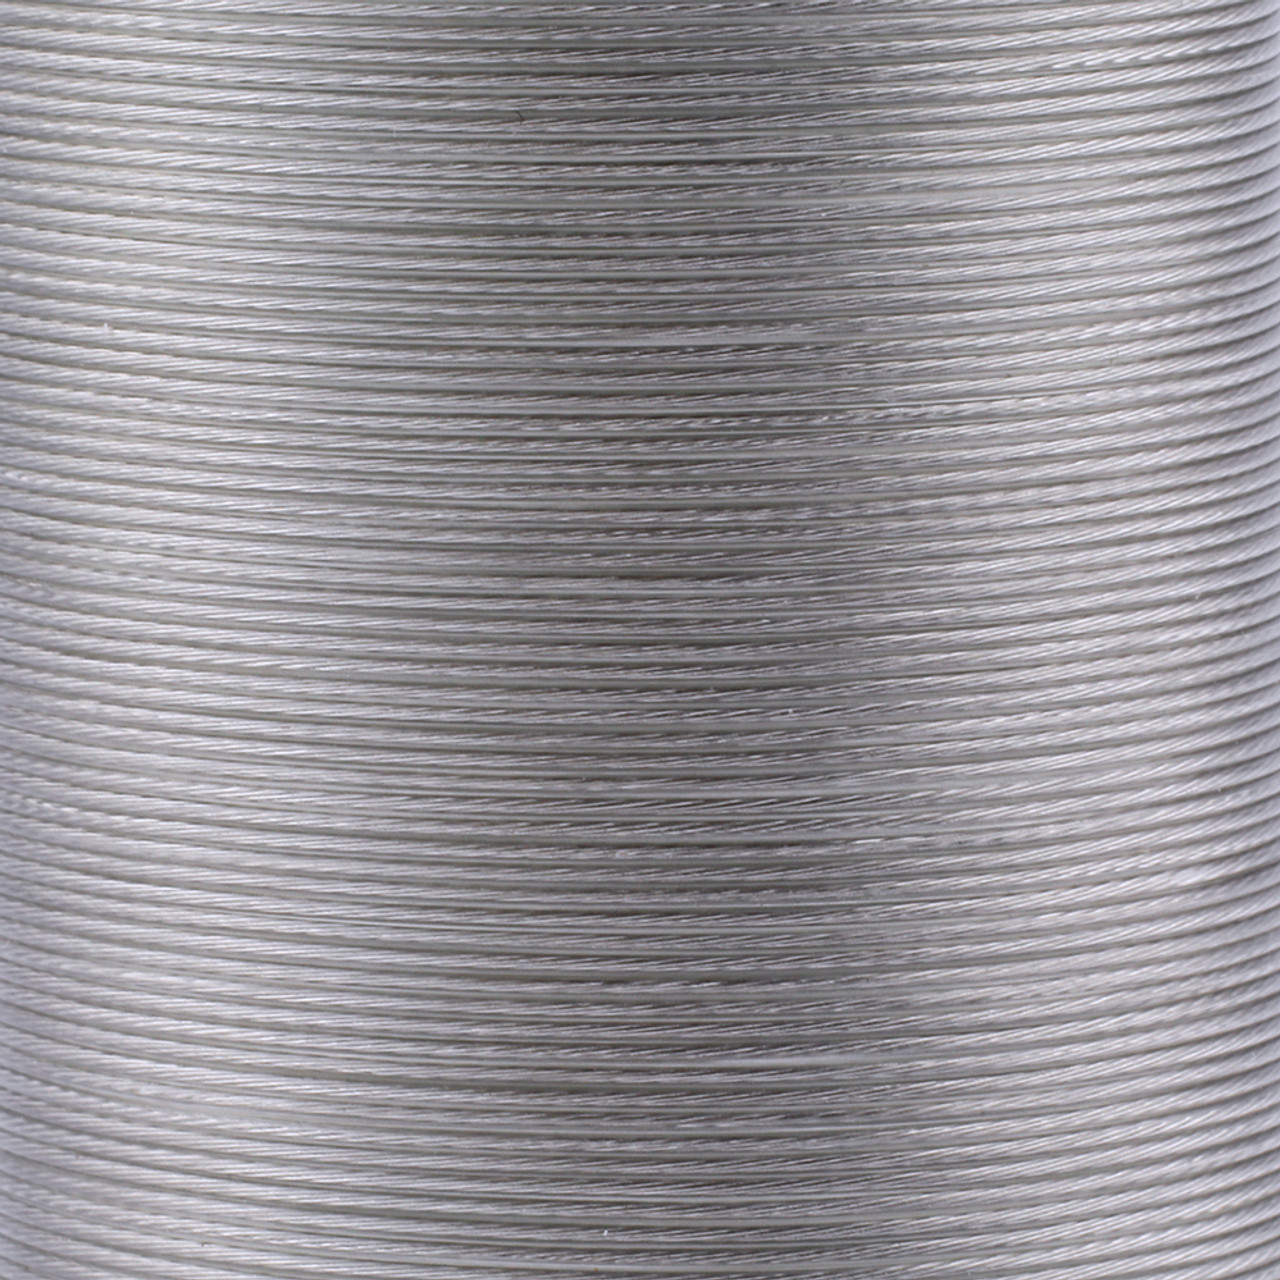 Tiger Tail Beading Wire 7-Strand .45mmx39'-Silver, 1 count - Harris Teeter